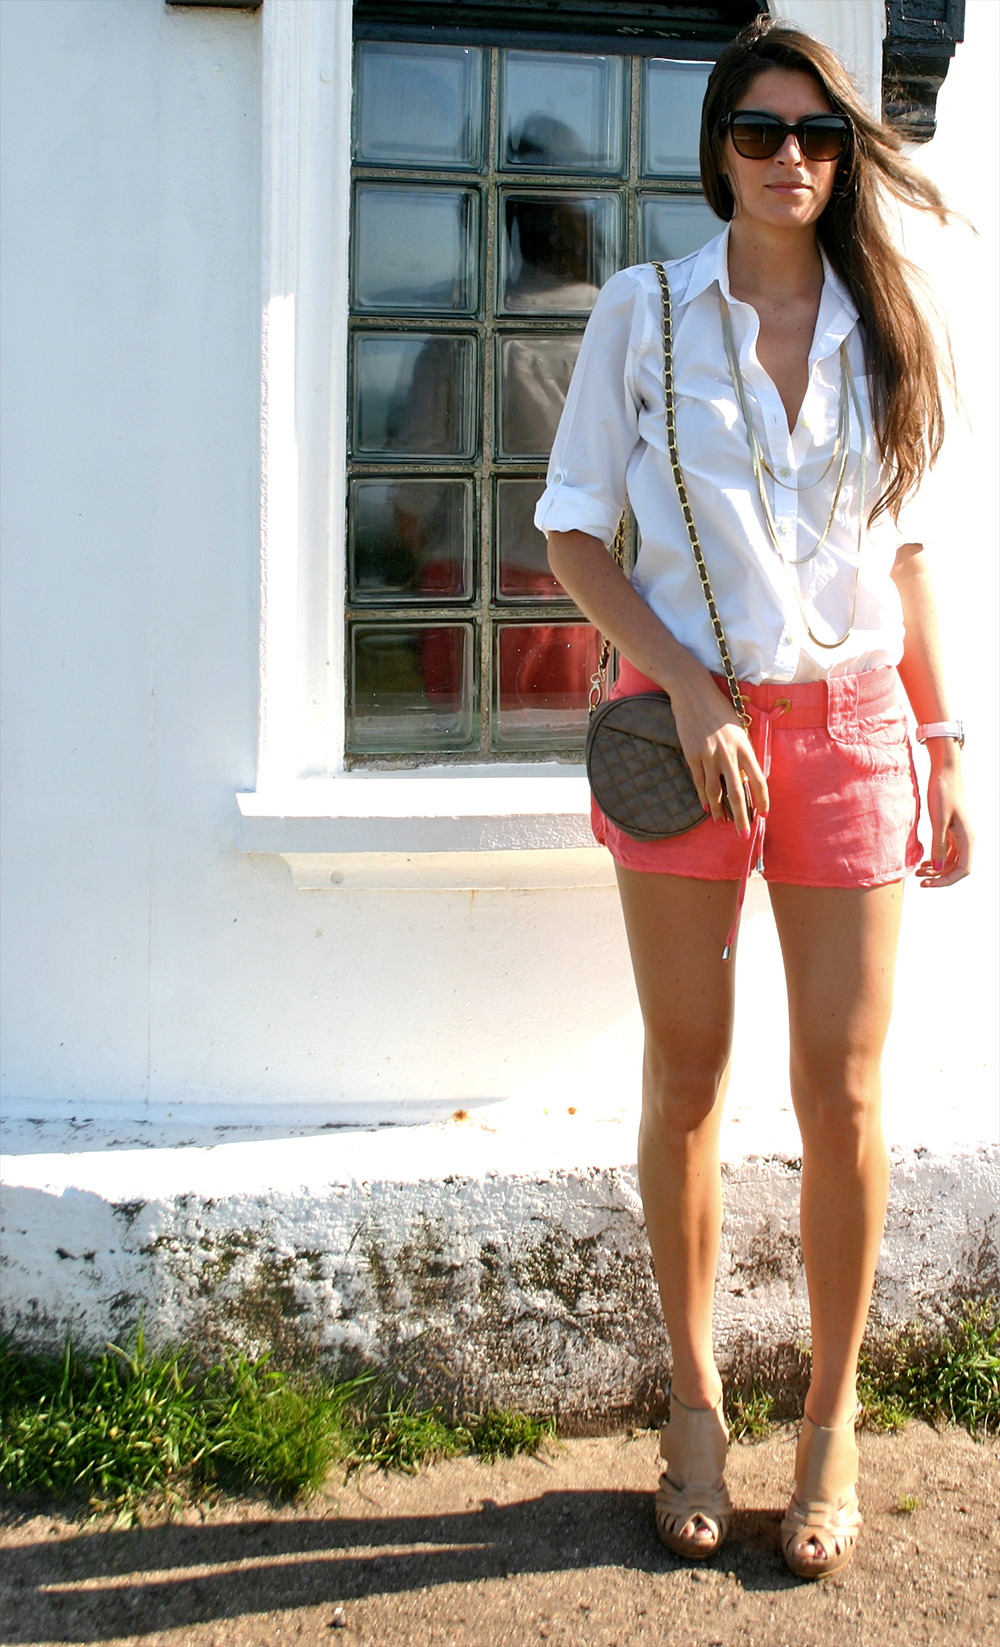 peach colored shorts - Outfitmag.com